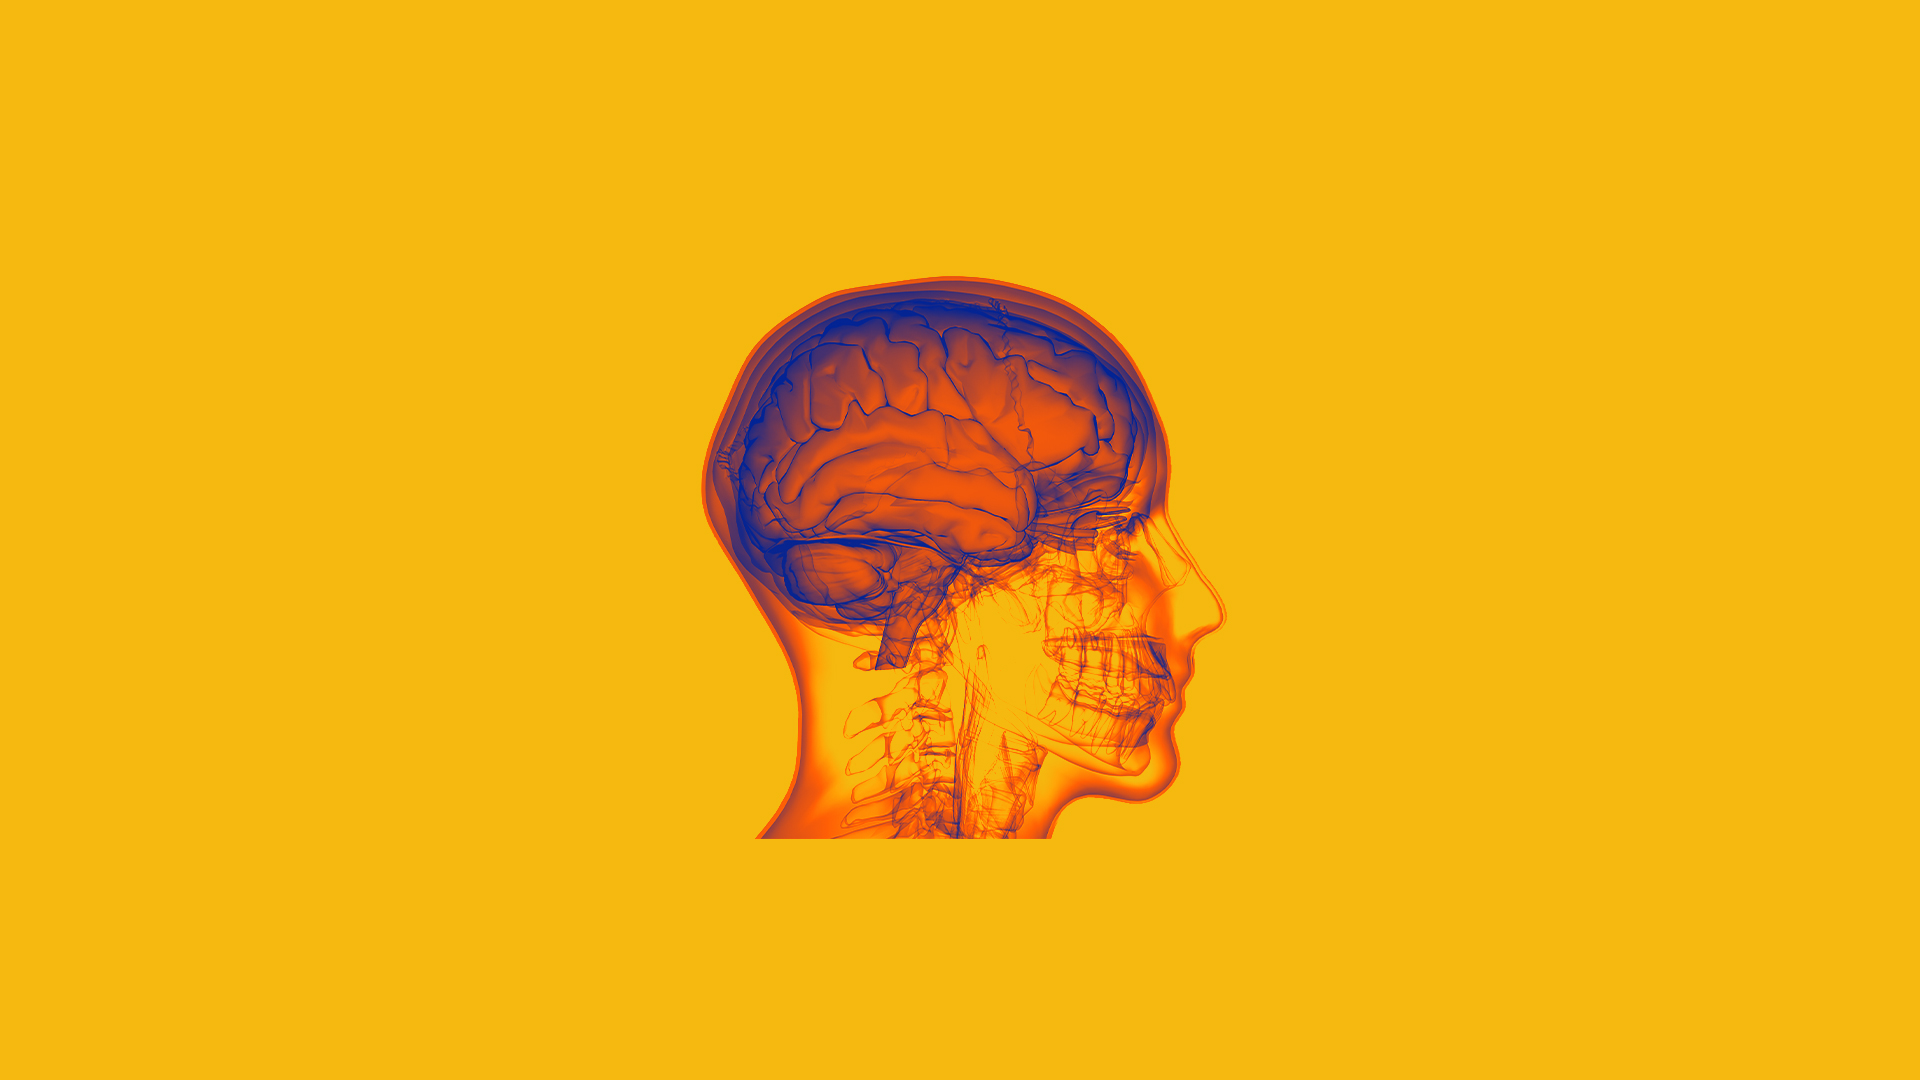 A person's head in an infrared image on a yellow background.